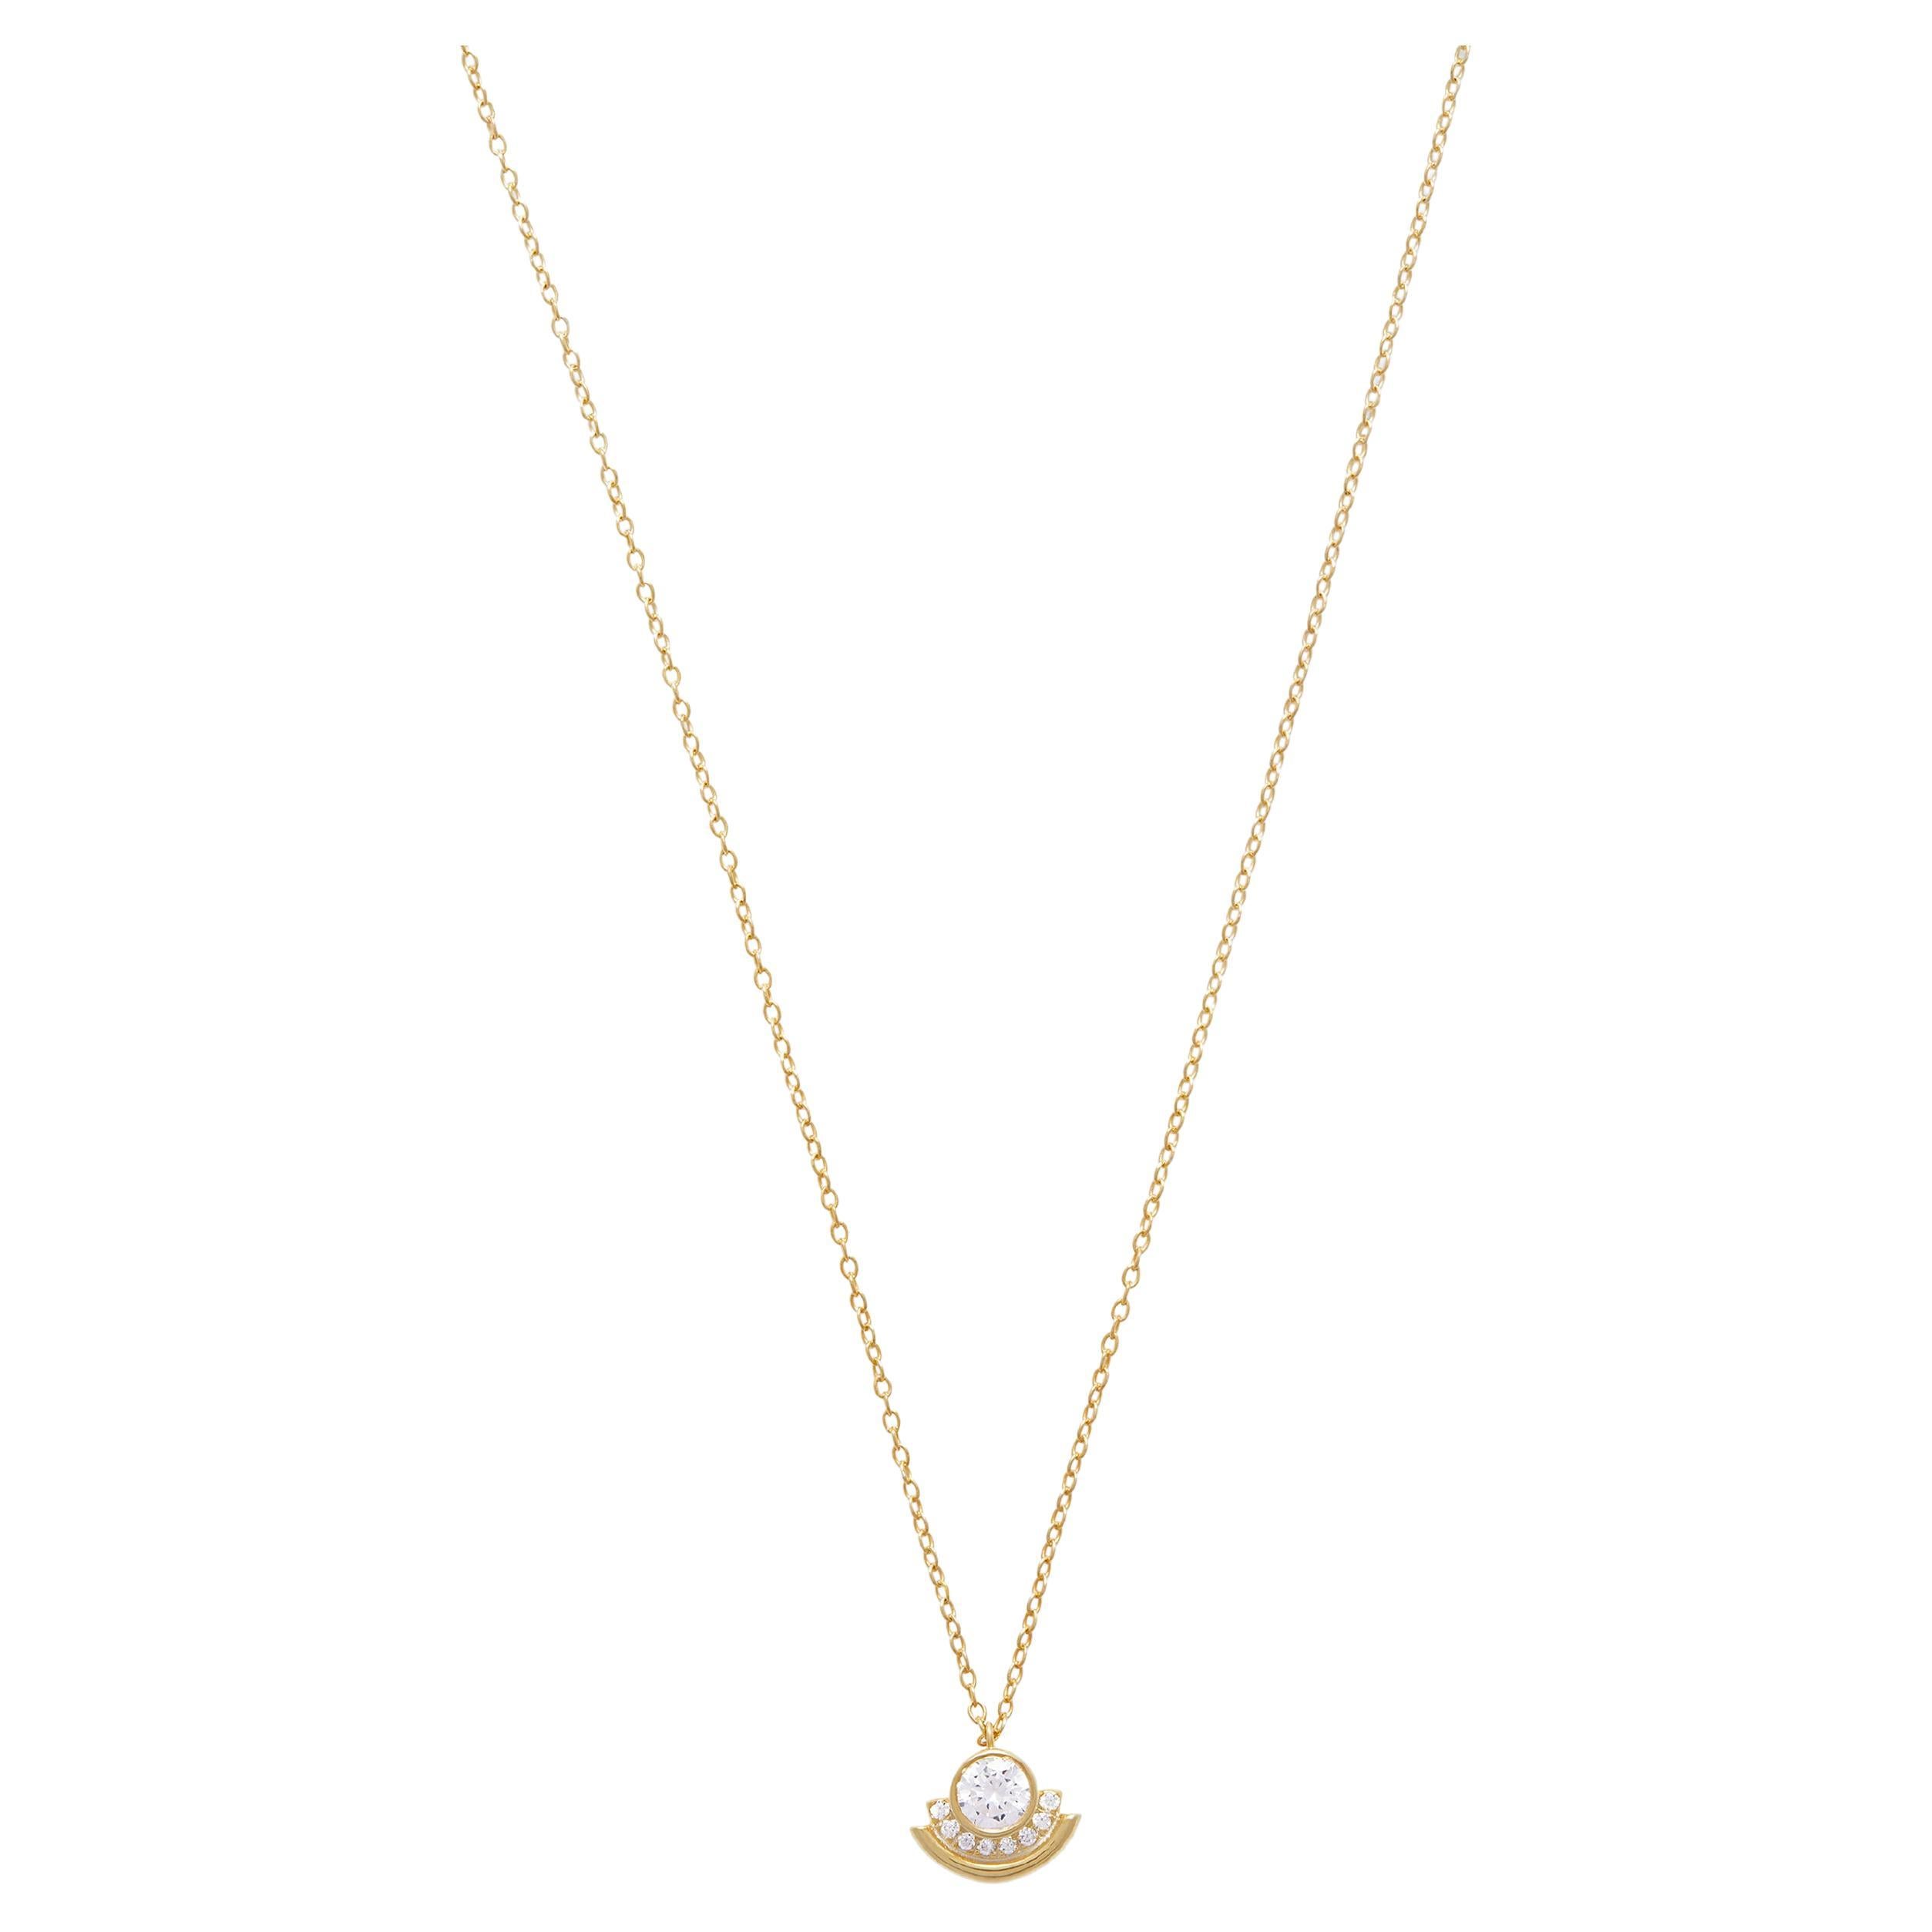 Casey Perez 18K Gold Arc Necklace with .8 carats of Brilliant Cut Diamonds For Sale